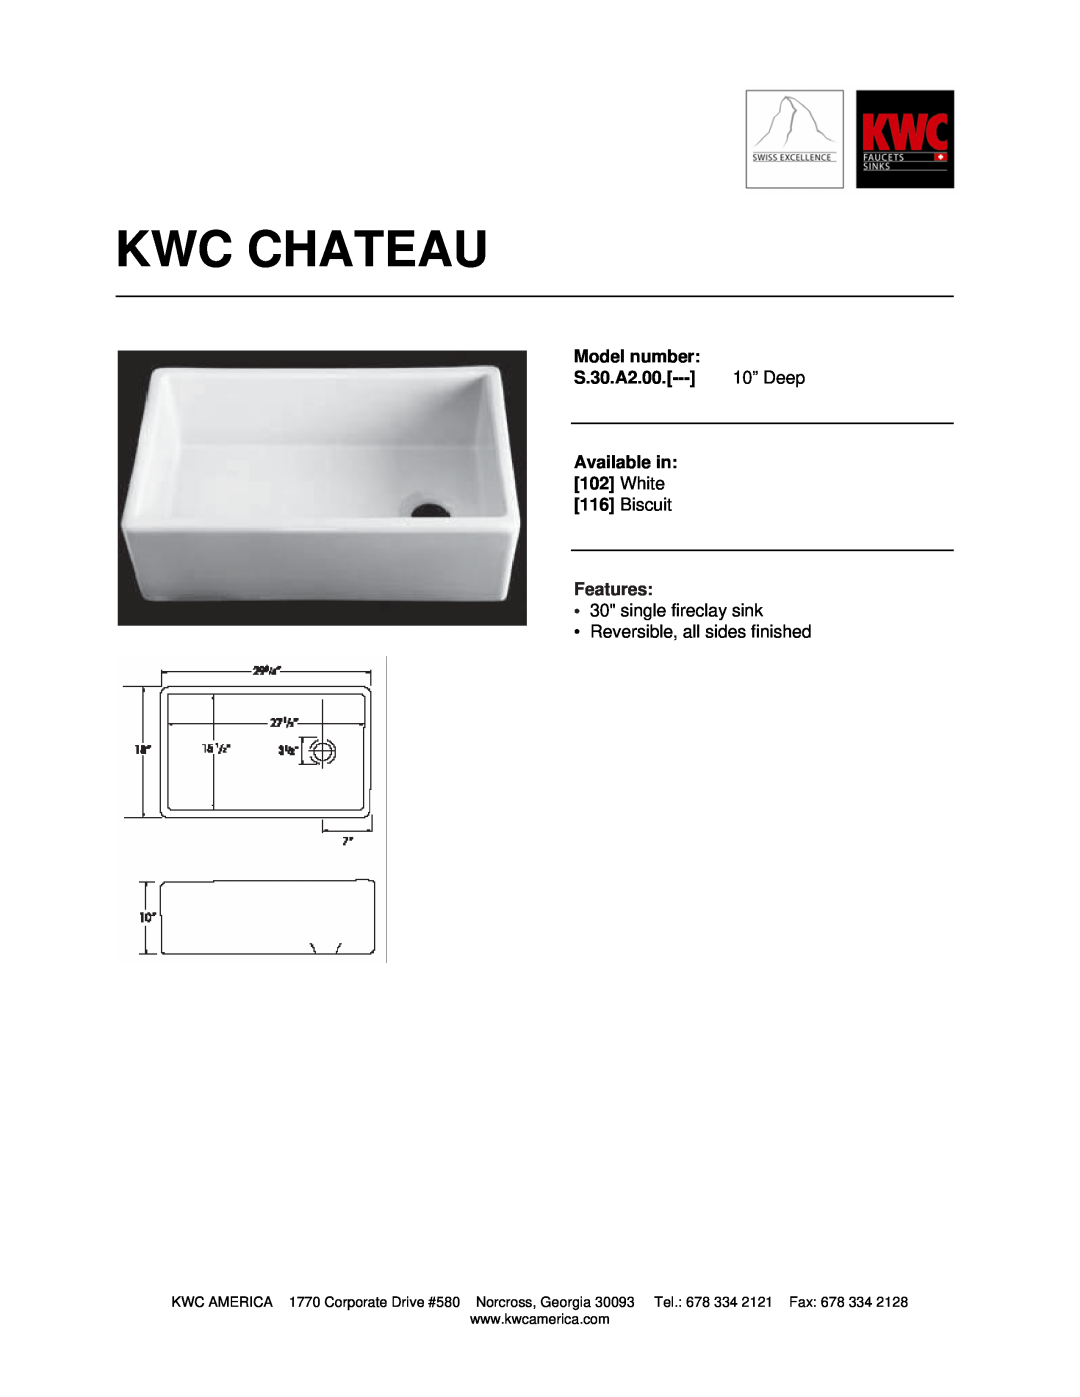 KWC S.30.A2.00 manual Kwc Chateau, Model number, 10” Deep, Available in 102 White, Biscuit, Features, single fireclay sink 